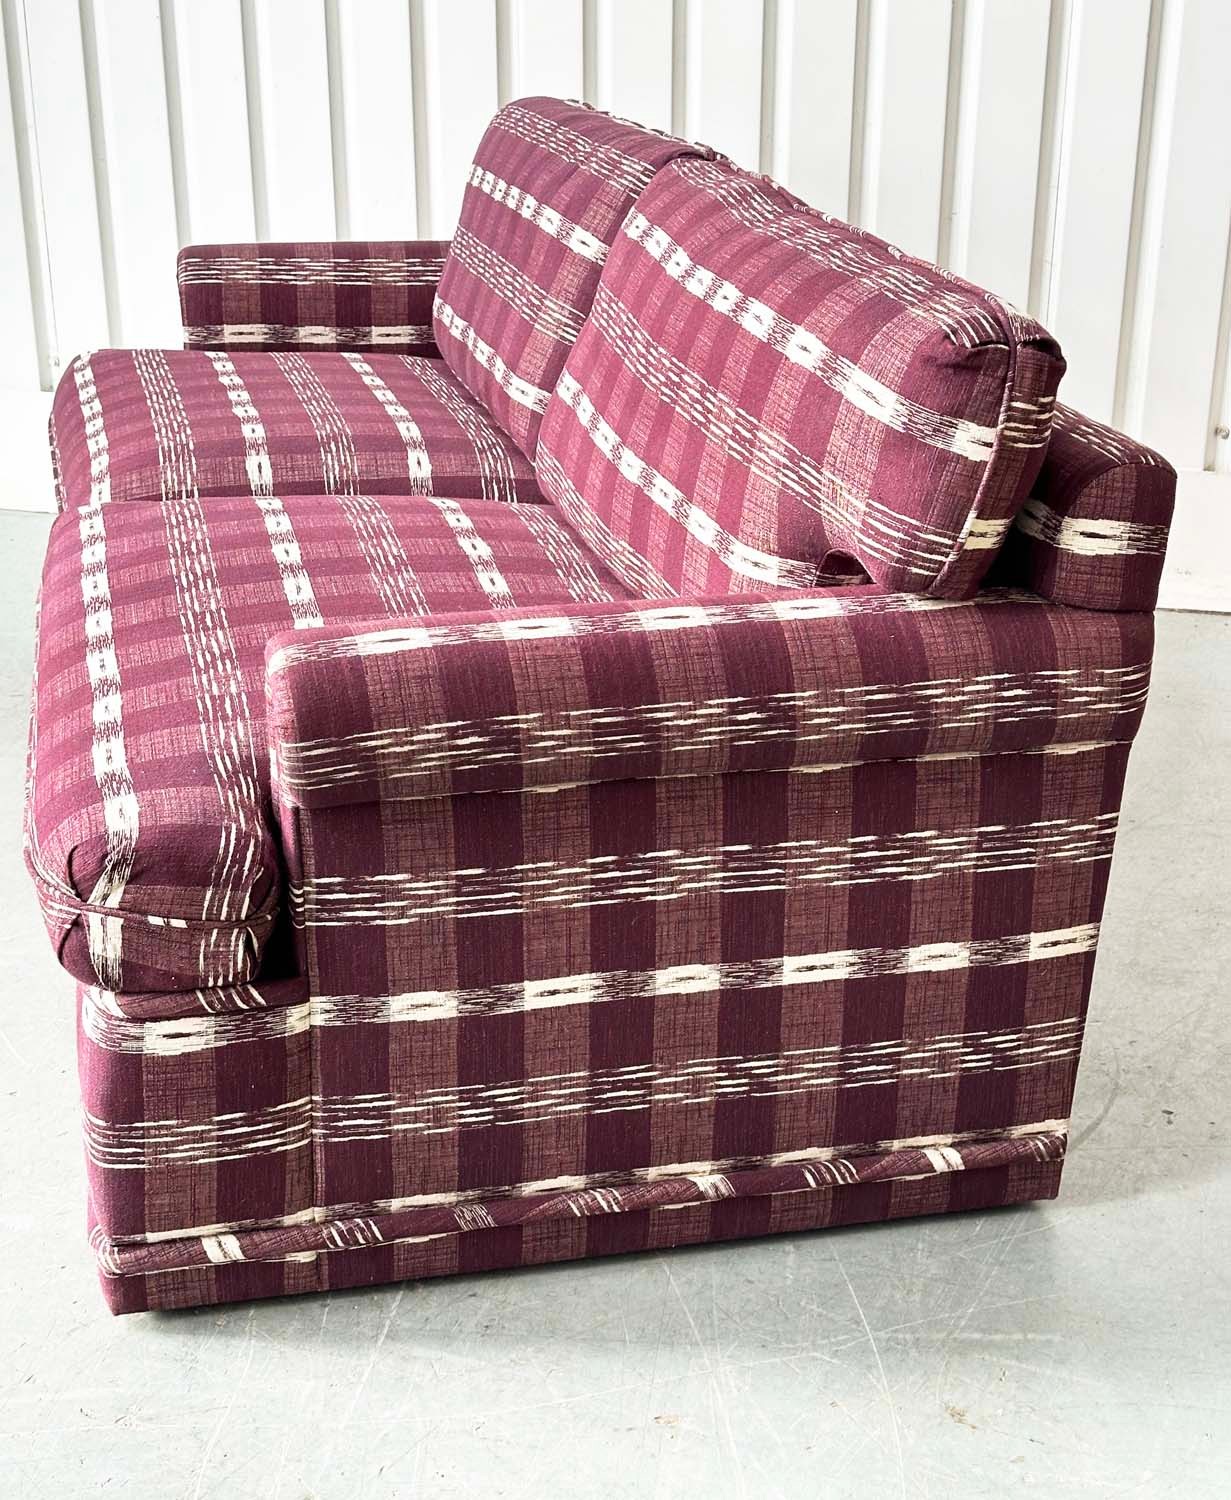 SOFA, Swedish check purple/white upholstery with scroll arms, 203cm W. - Image 9 of 9